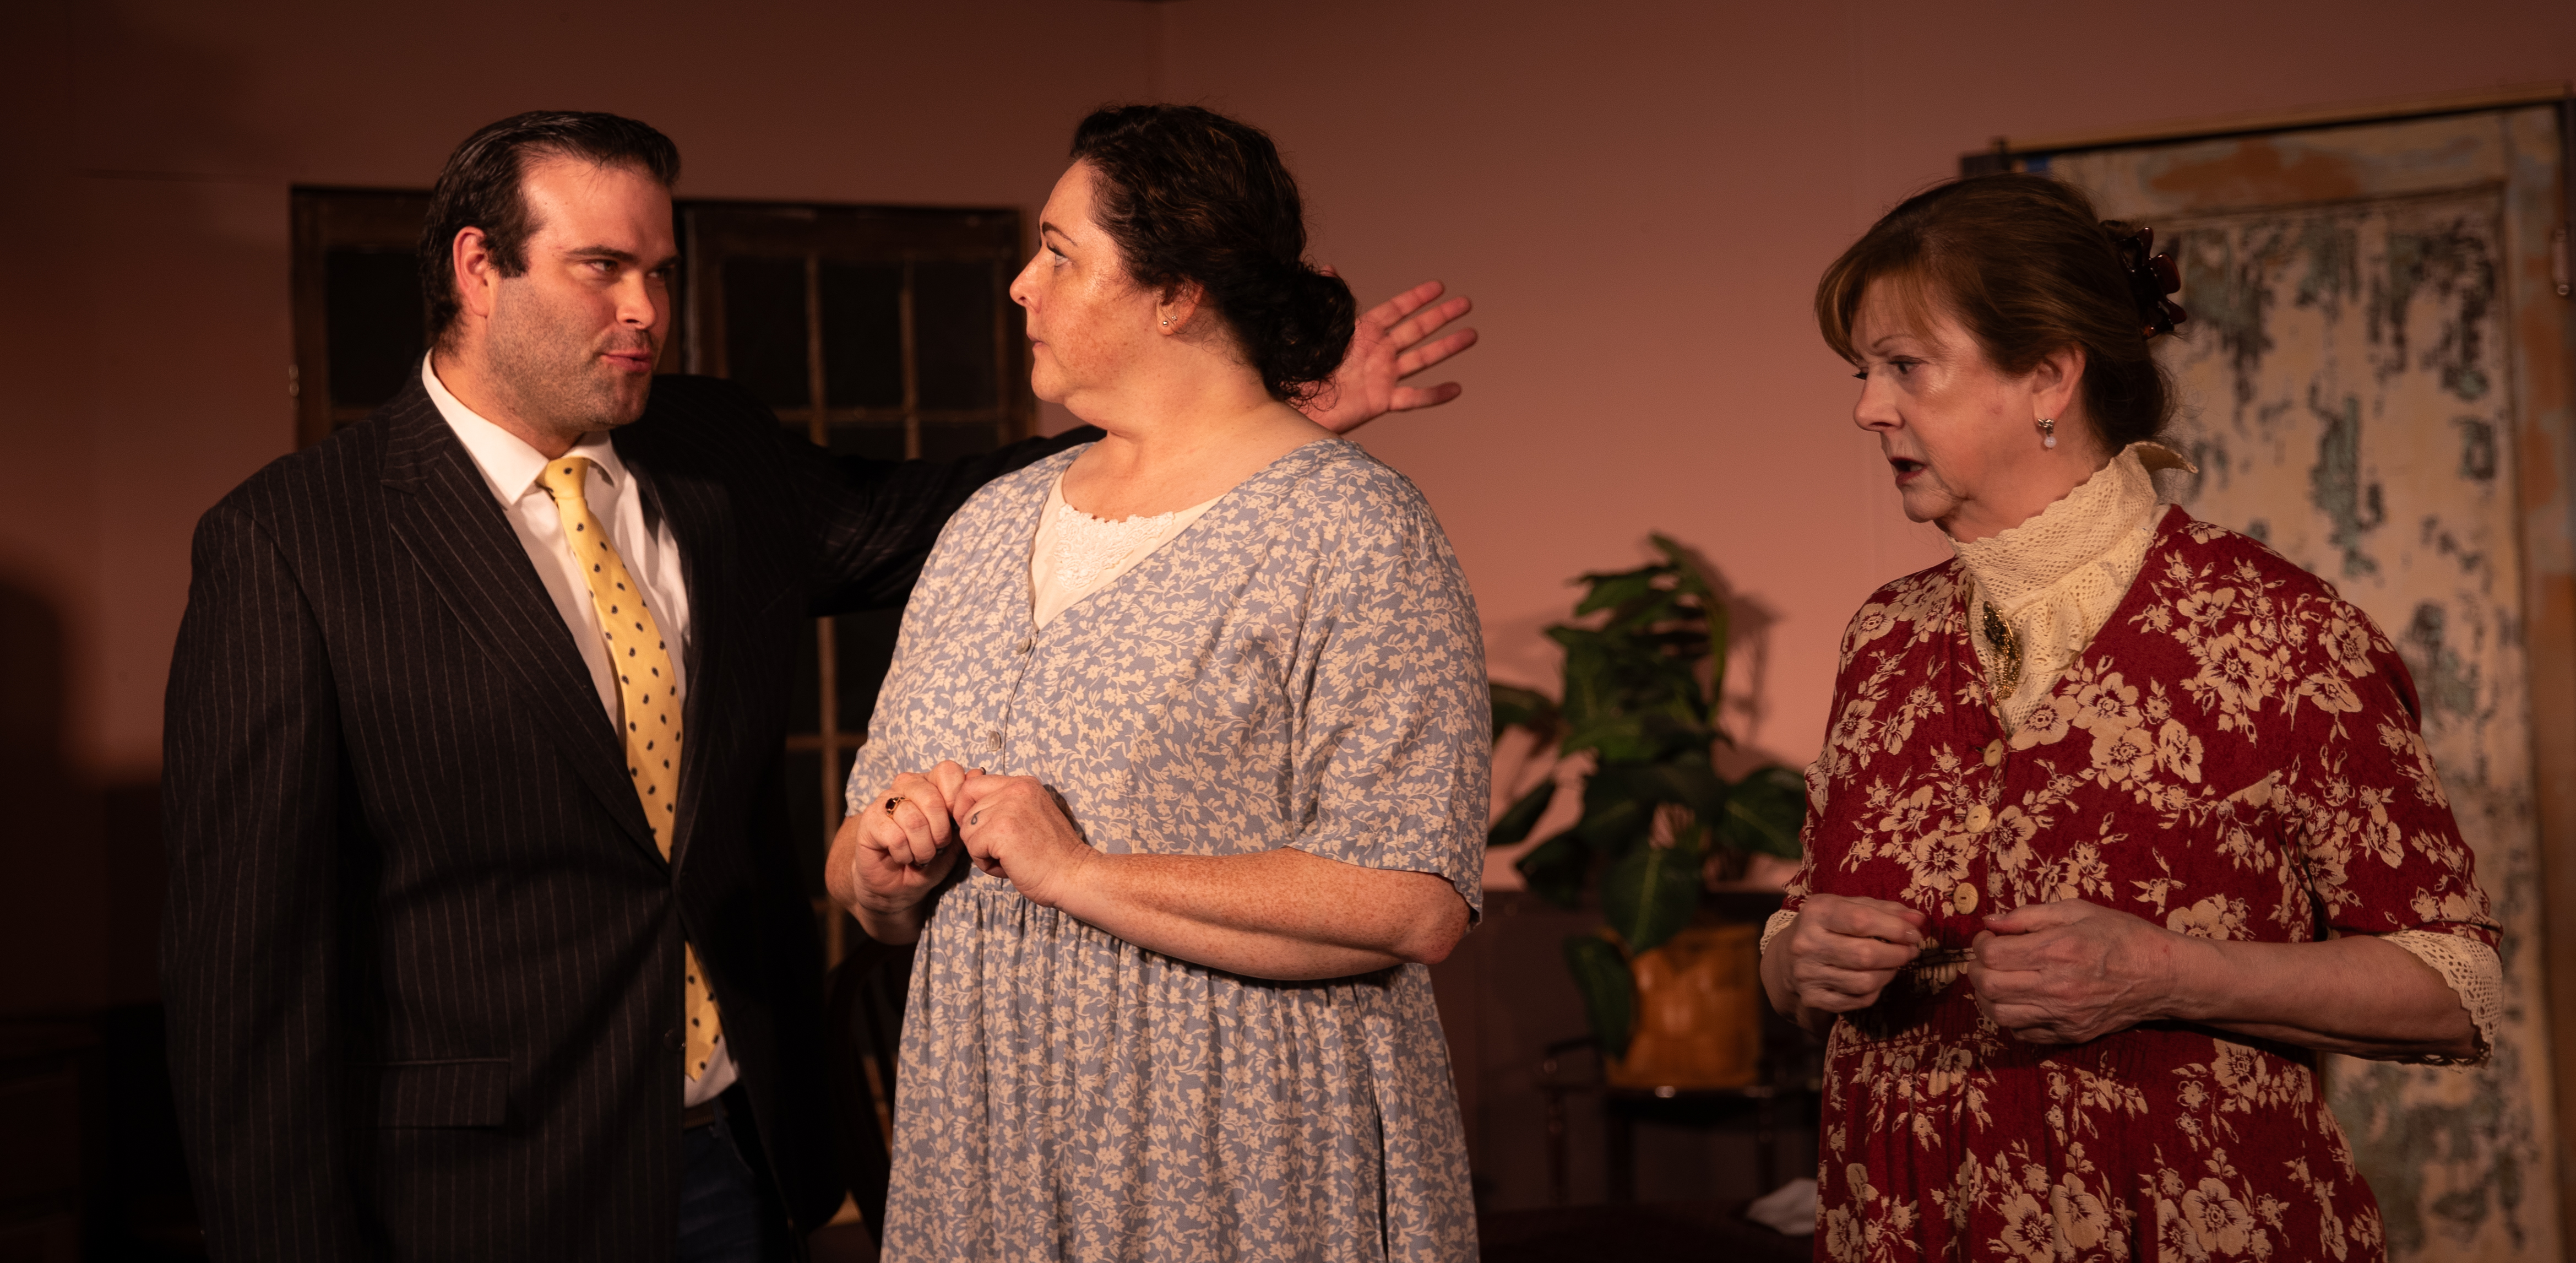 Josh Head as JONATHAN BREWSTER, Denise Bishop Cotten as ABBY BREWSTER, and Lucy MacCabe Conner as MARTHA BREWSTER